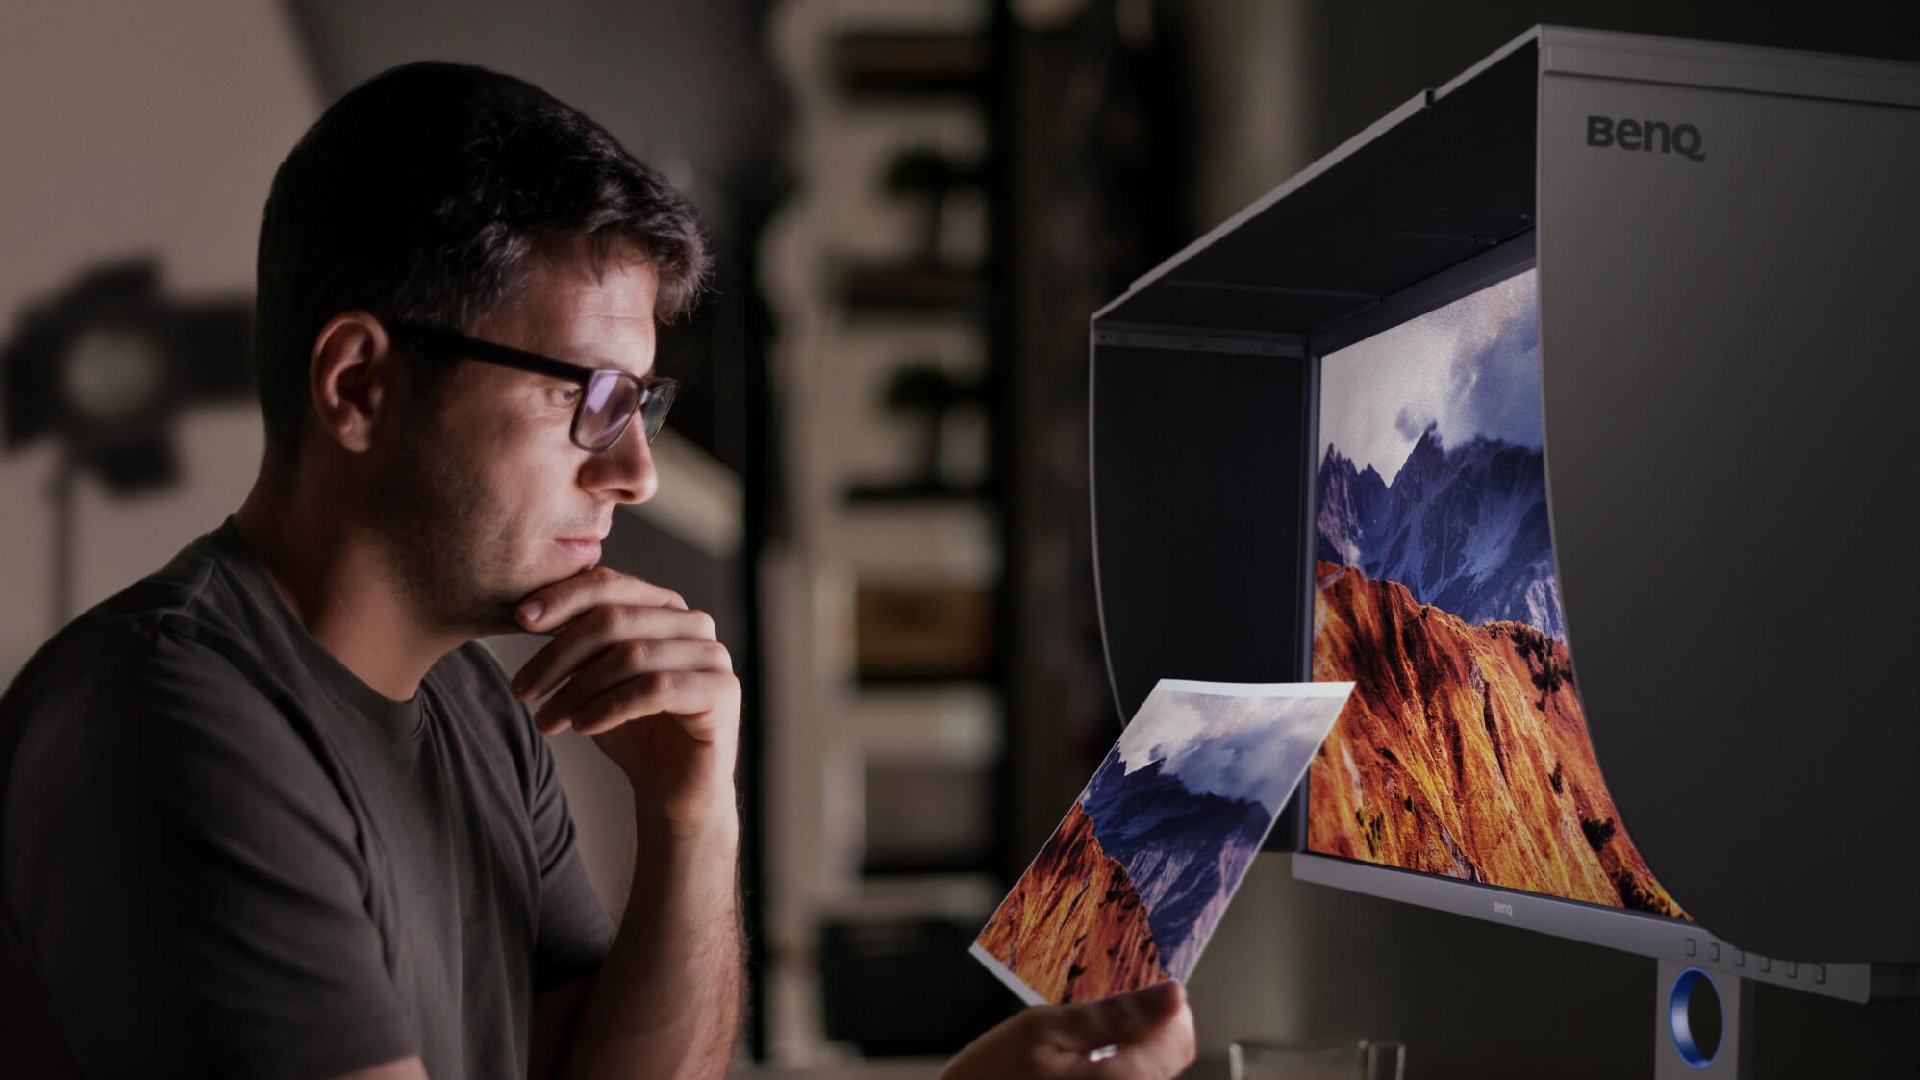 benq paper color sync brings accurate screen reviewing for confident photo-editing